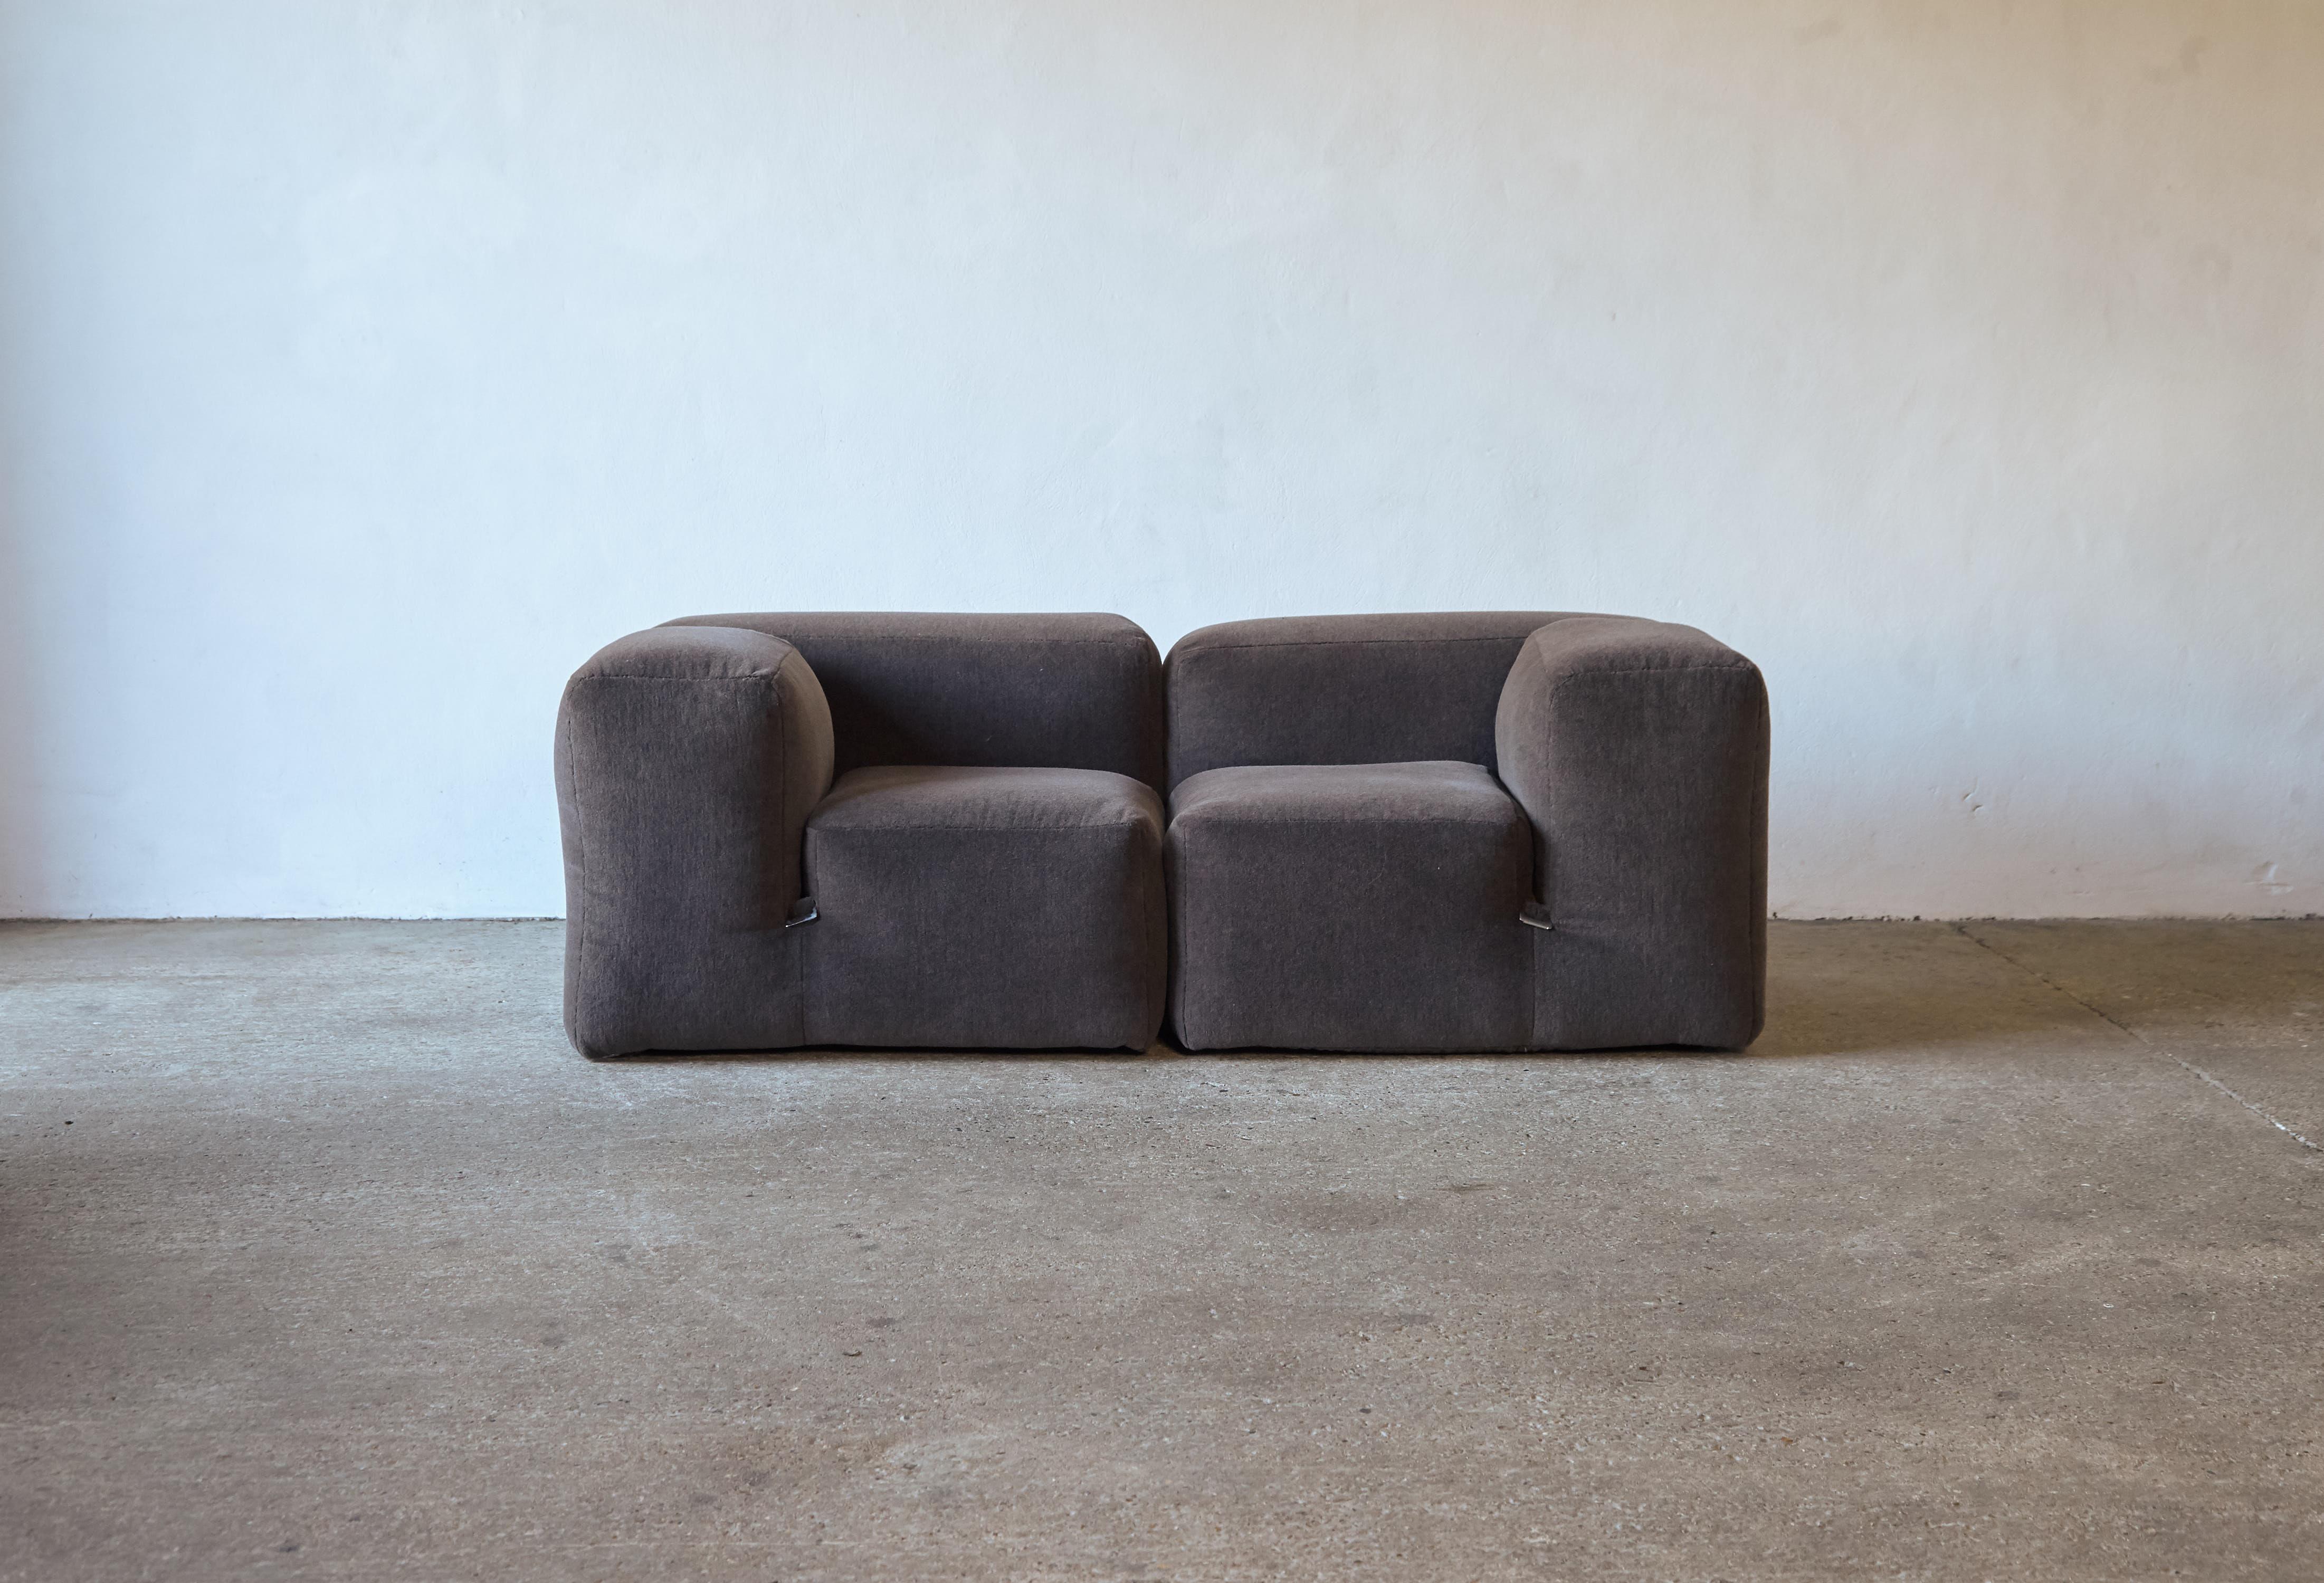 An original and very rare Mario Bellini Le Mura modular sofa (can also be used as two chairs), made by Cassina, Italy, 1970s. Two large seating elements that together make a two seater sofa. Newly upholstered in a premium, pure brown/grey Alpaca